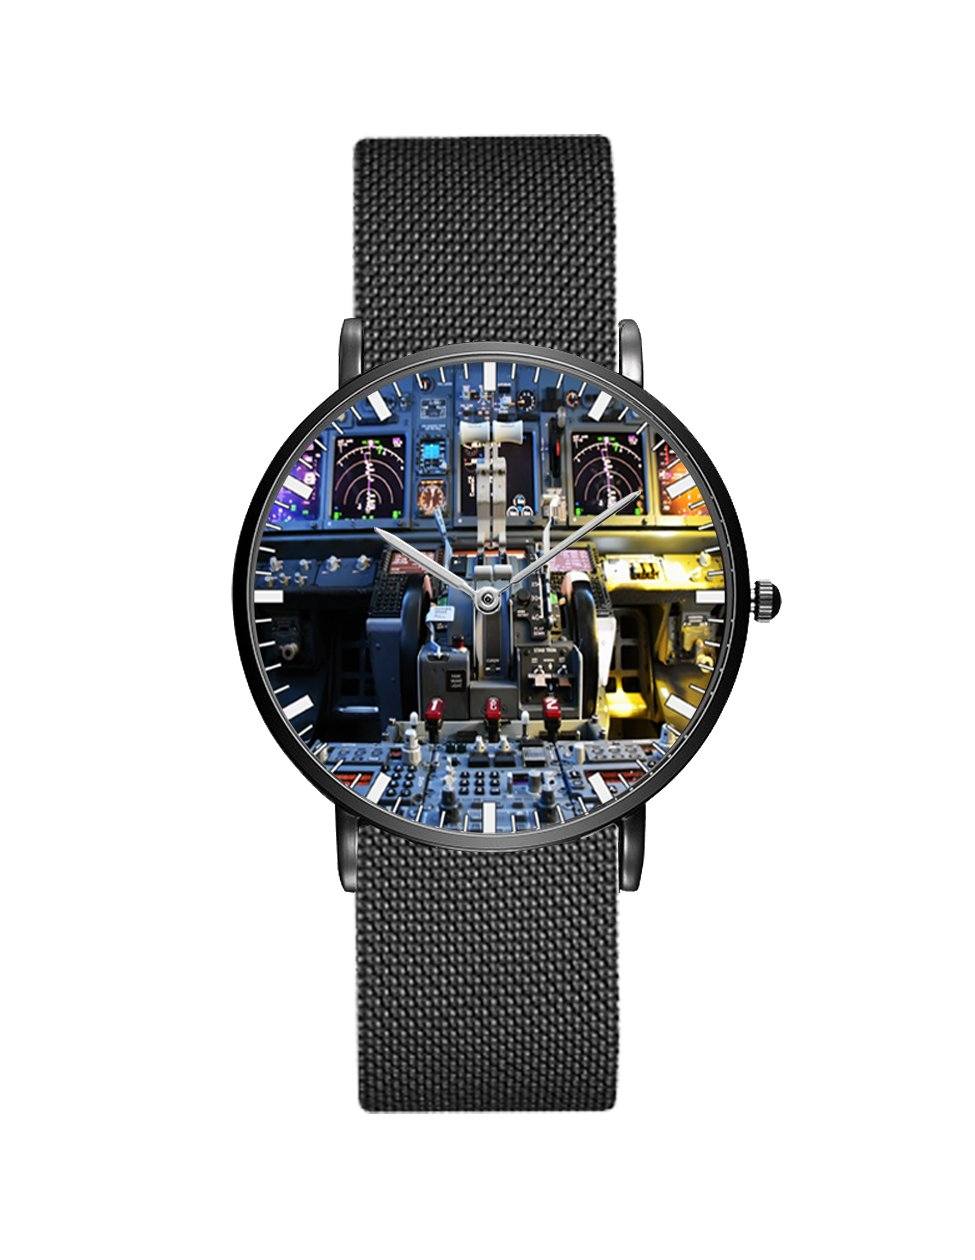 Boeing 737 Cockpit Designed Stainless Steel Strap Watches Pilot Eyes Store Black & Stainless Steel Strap 